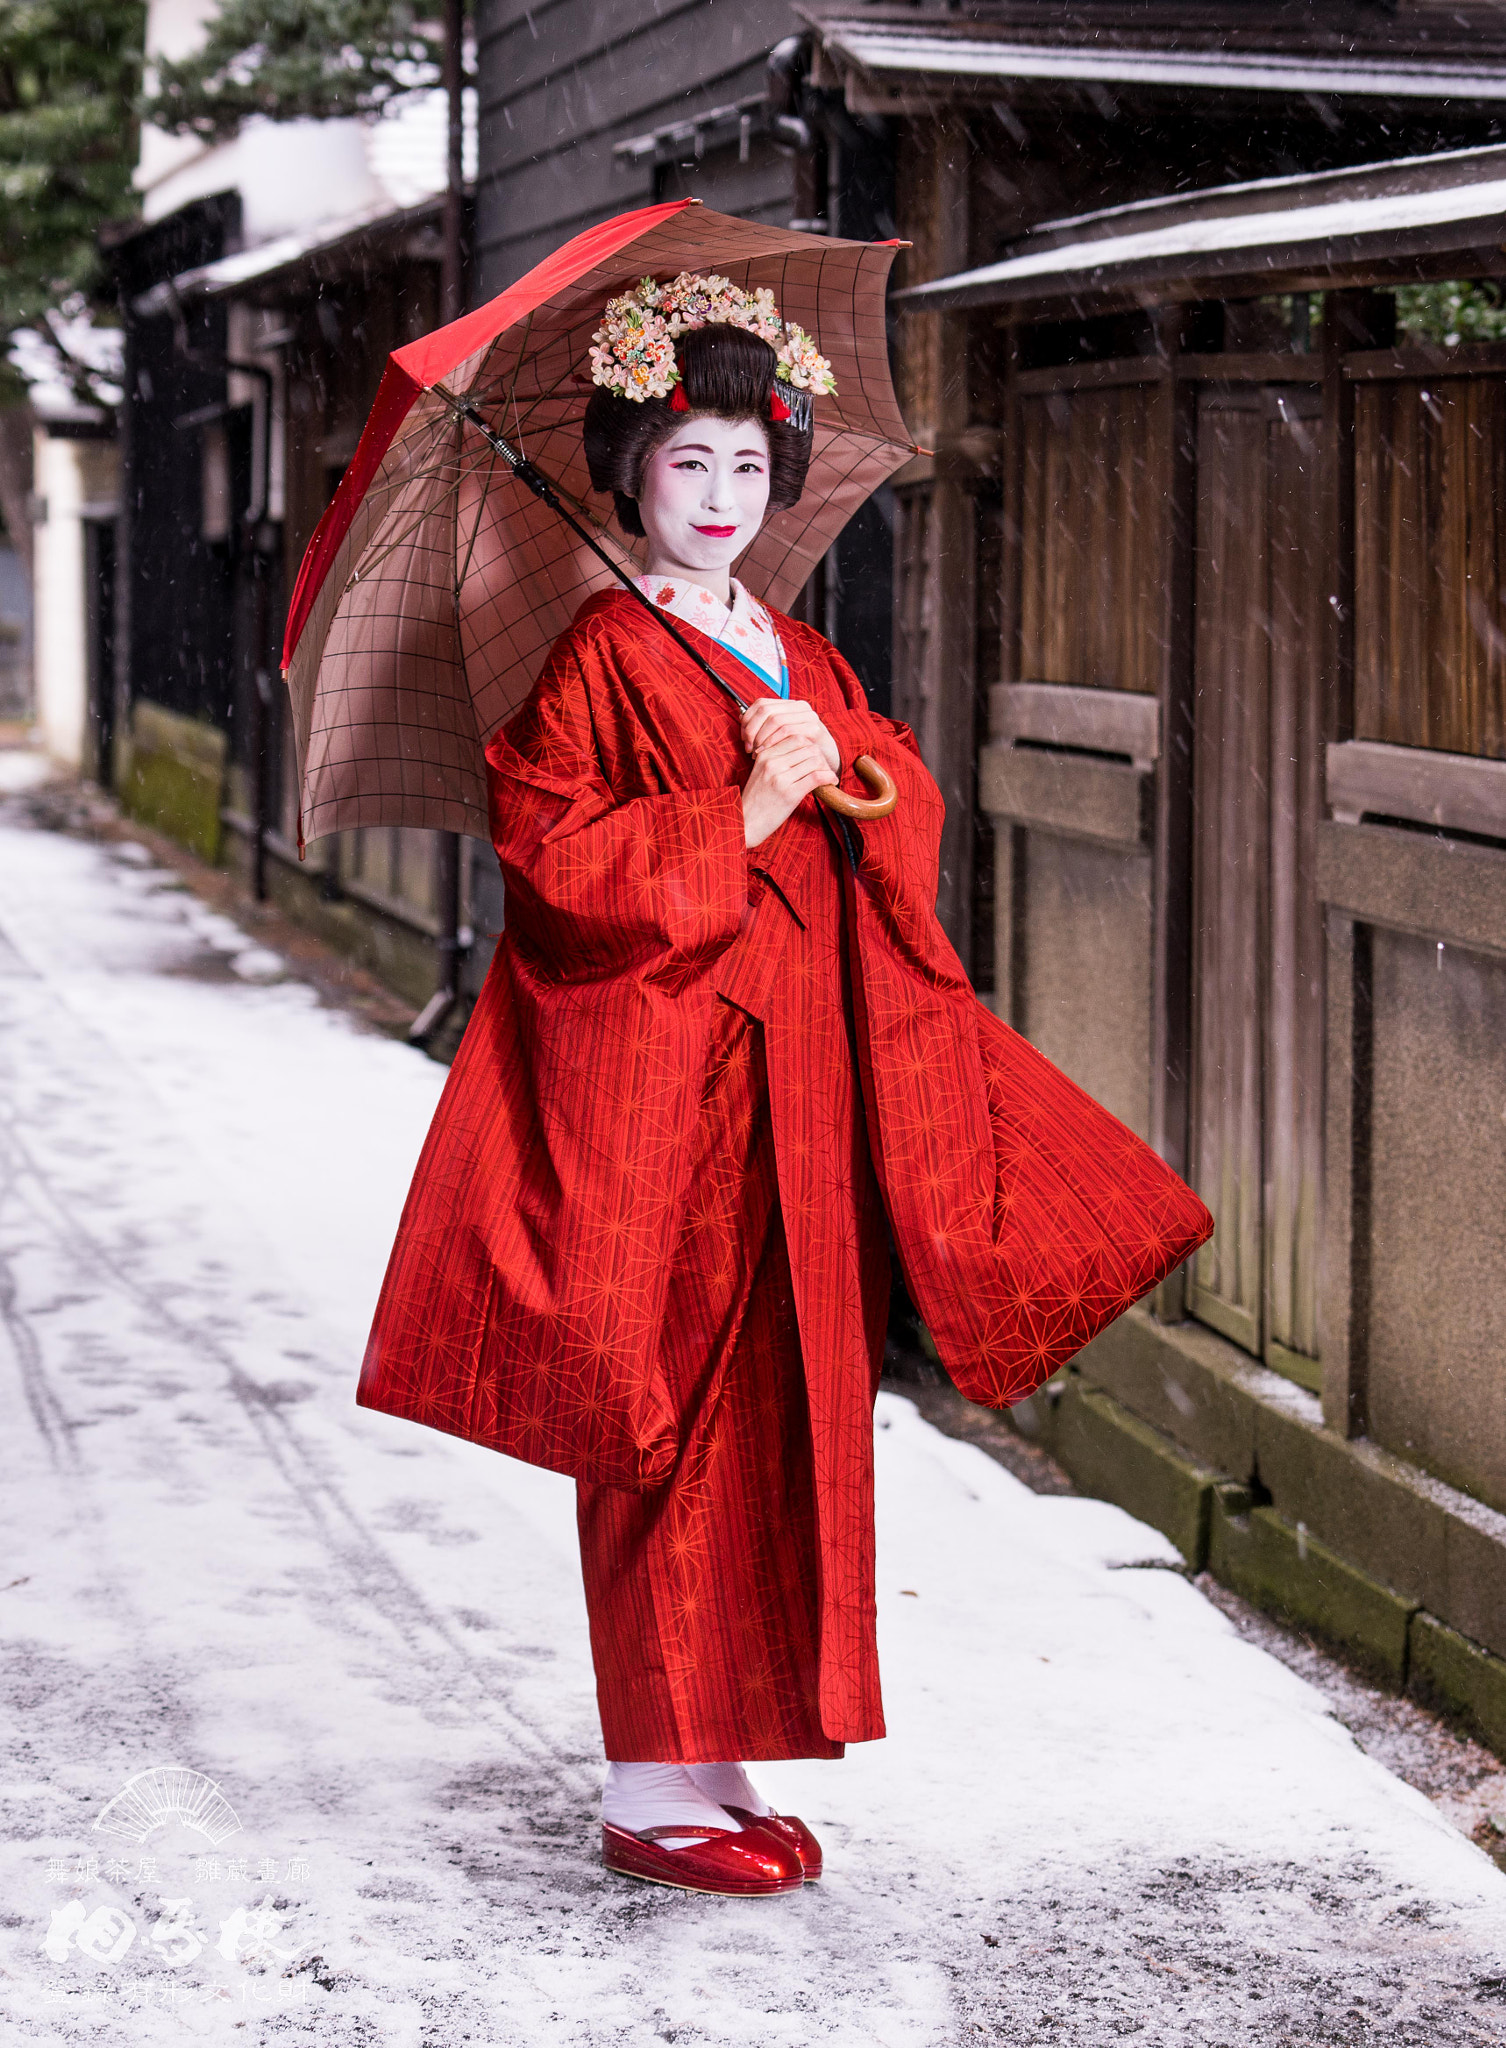 Sony a7 sample photo. A maiko in the snow photography